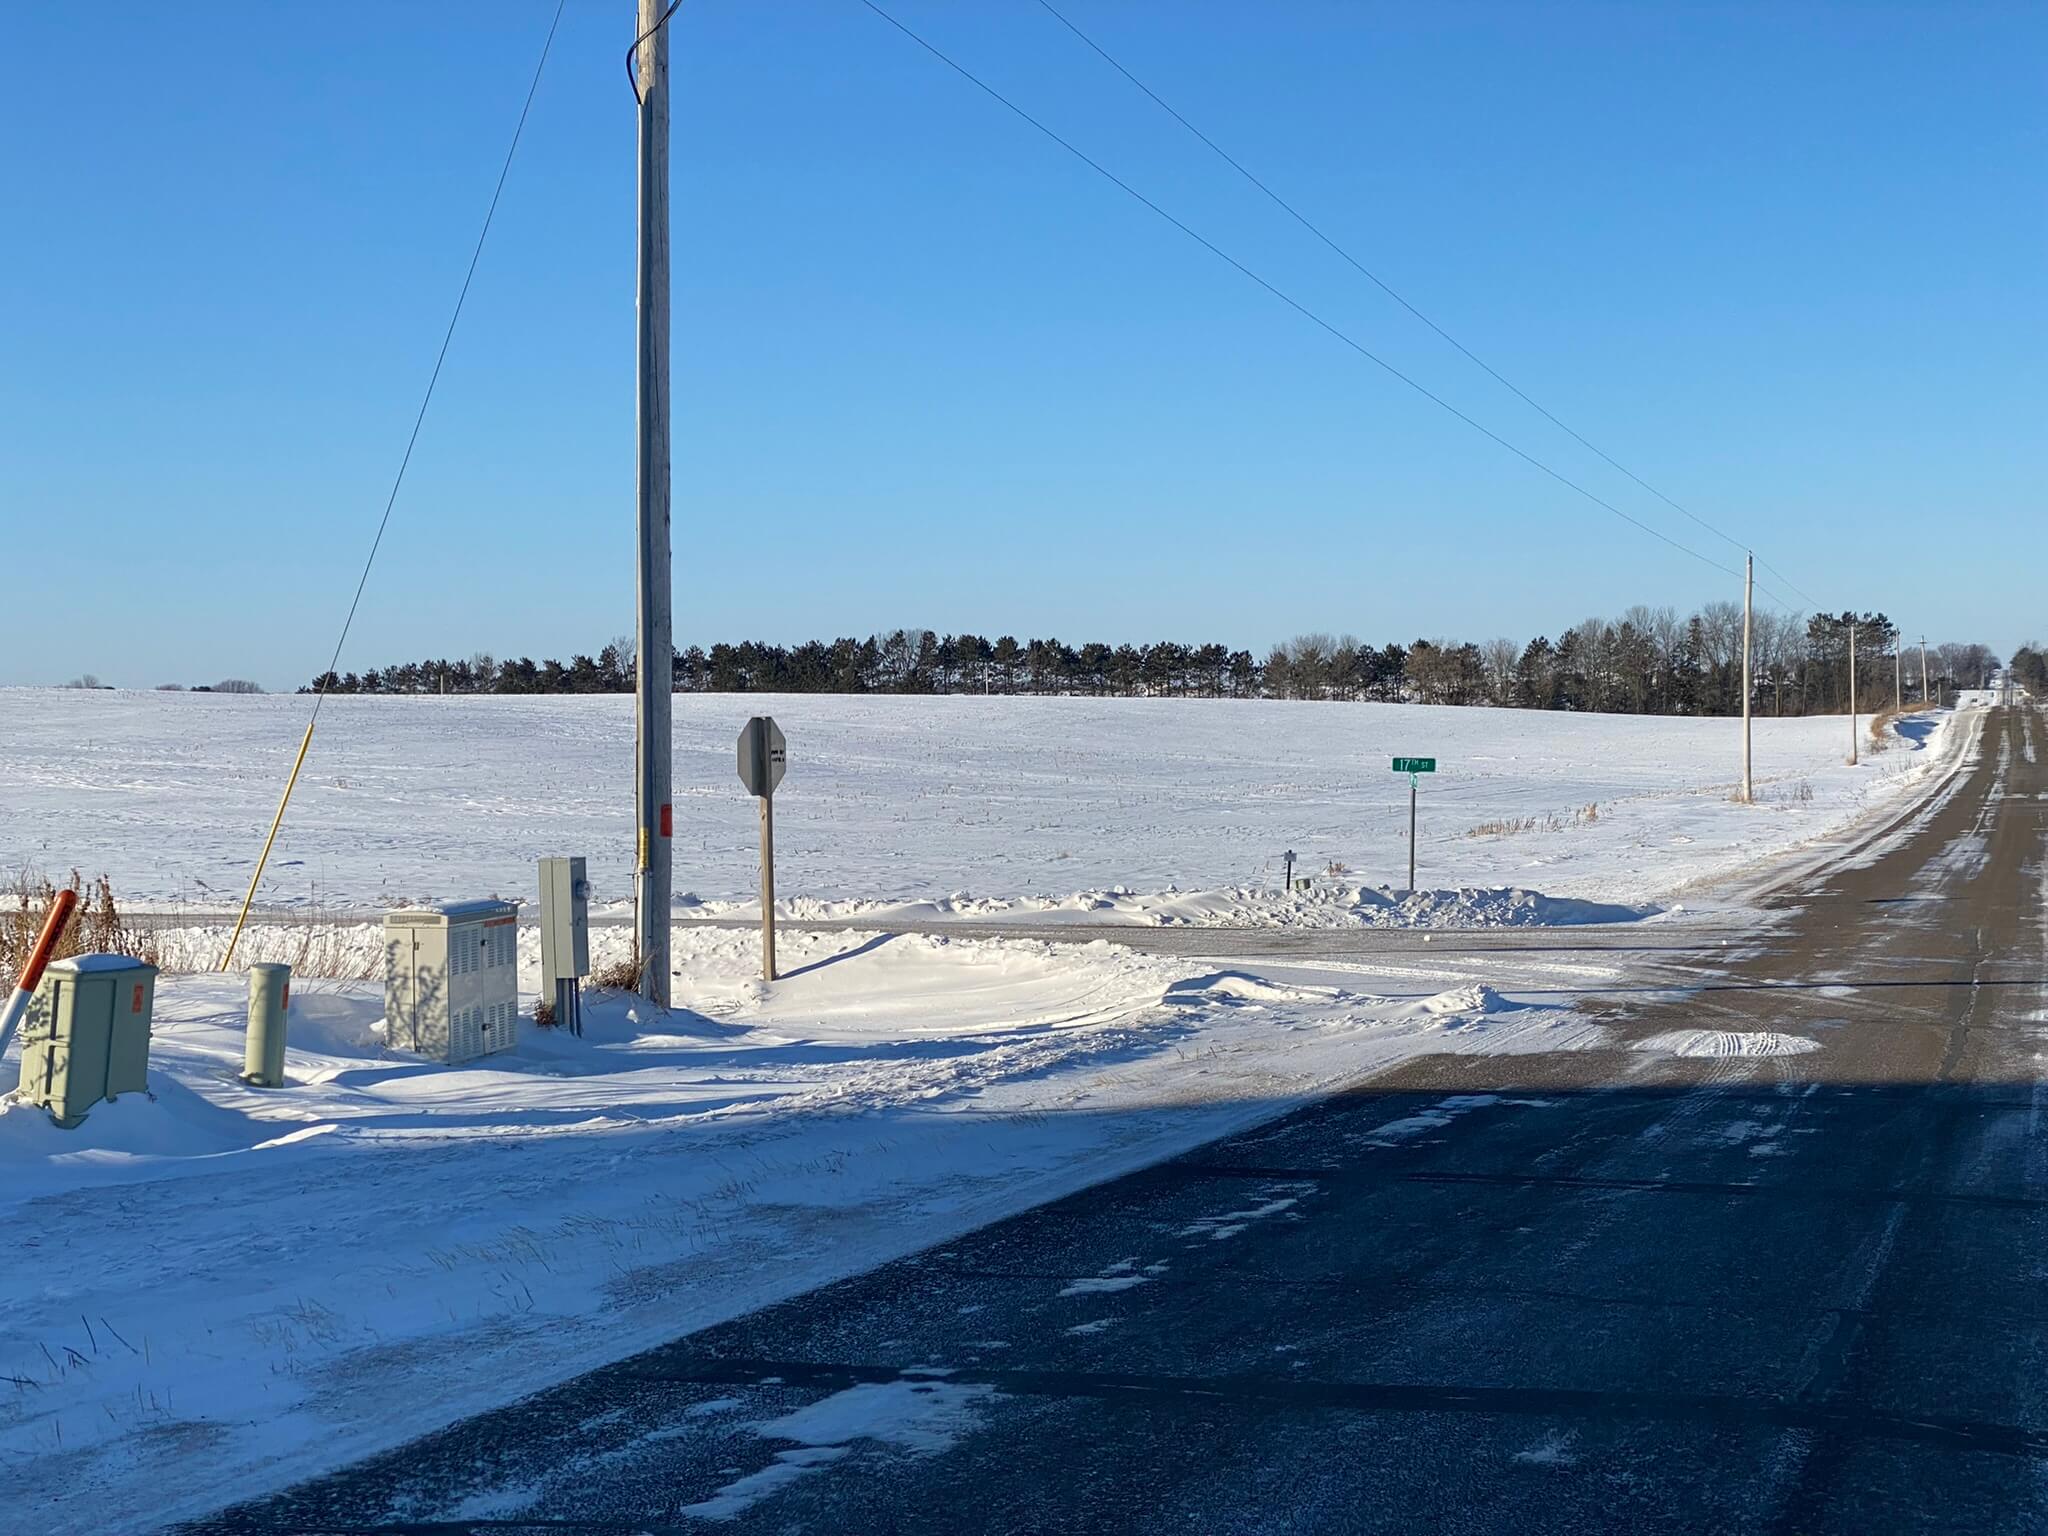 Frozen out: 25 years of broadband failure in rural northern Wisconsin - Abe  Voelker